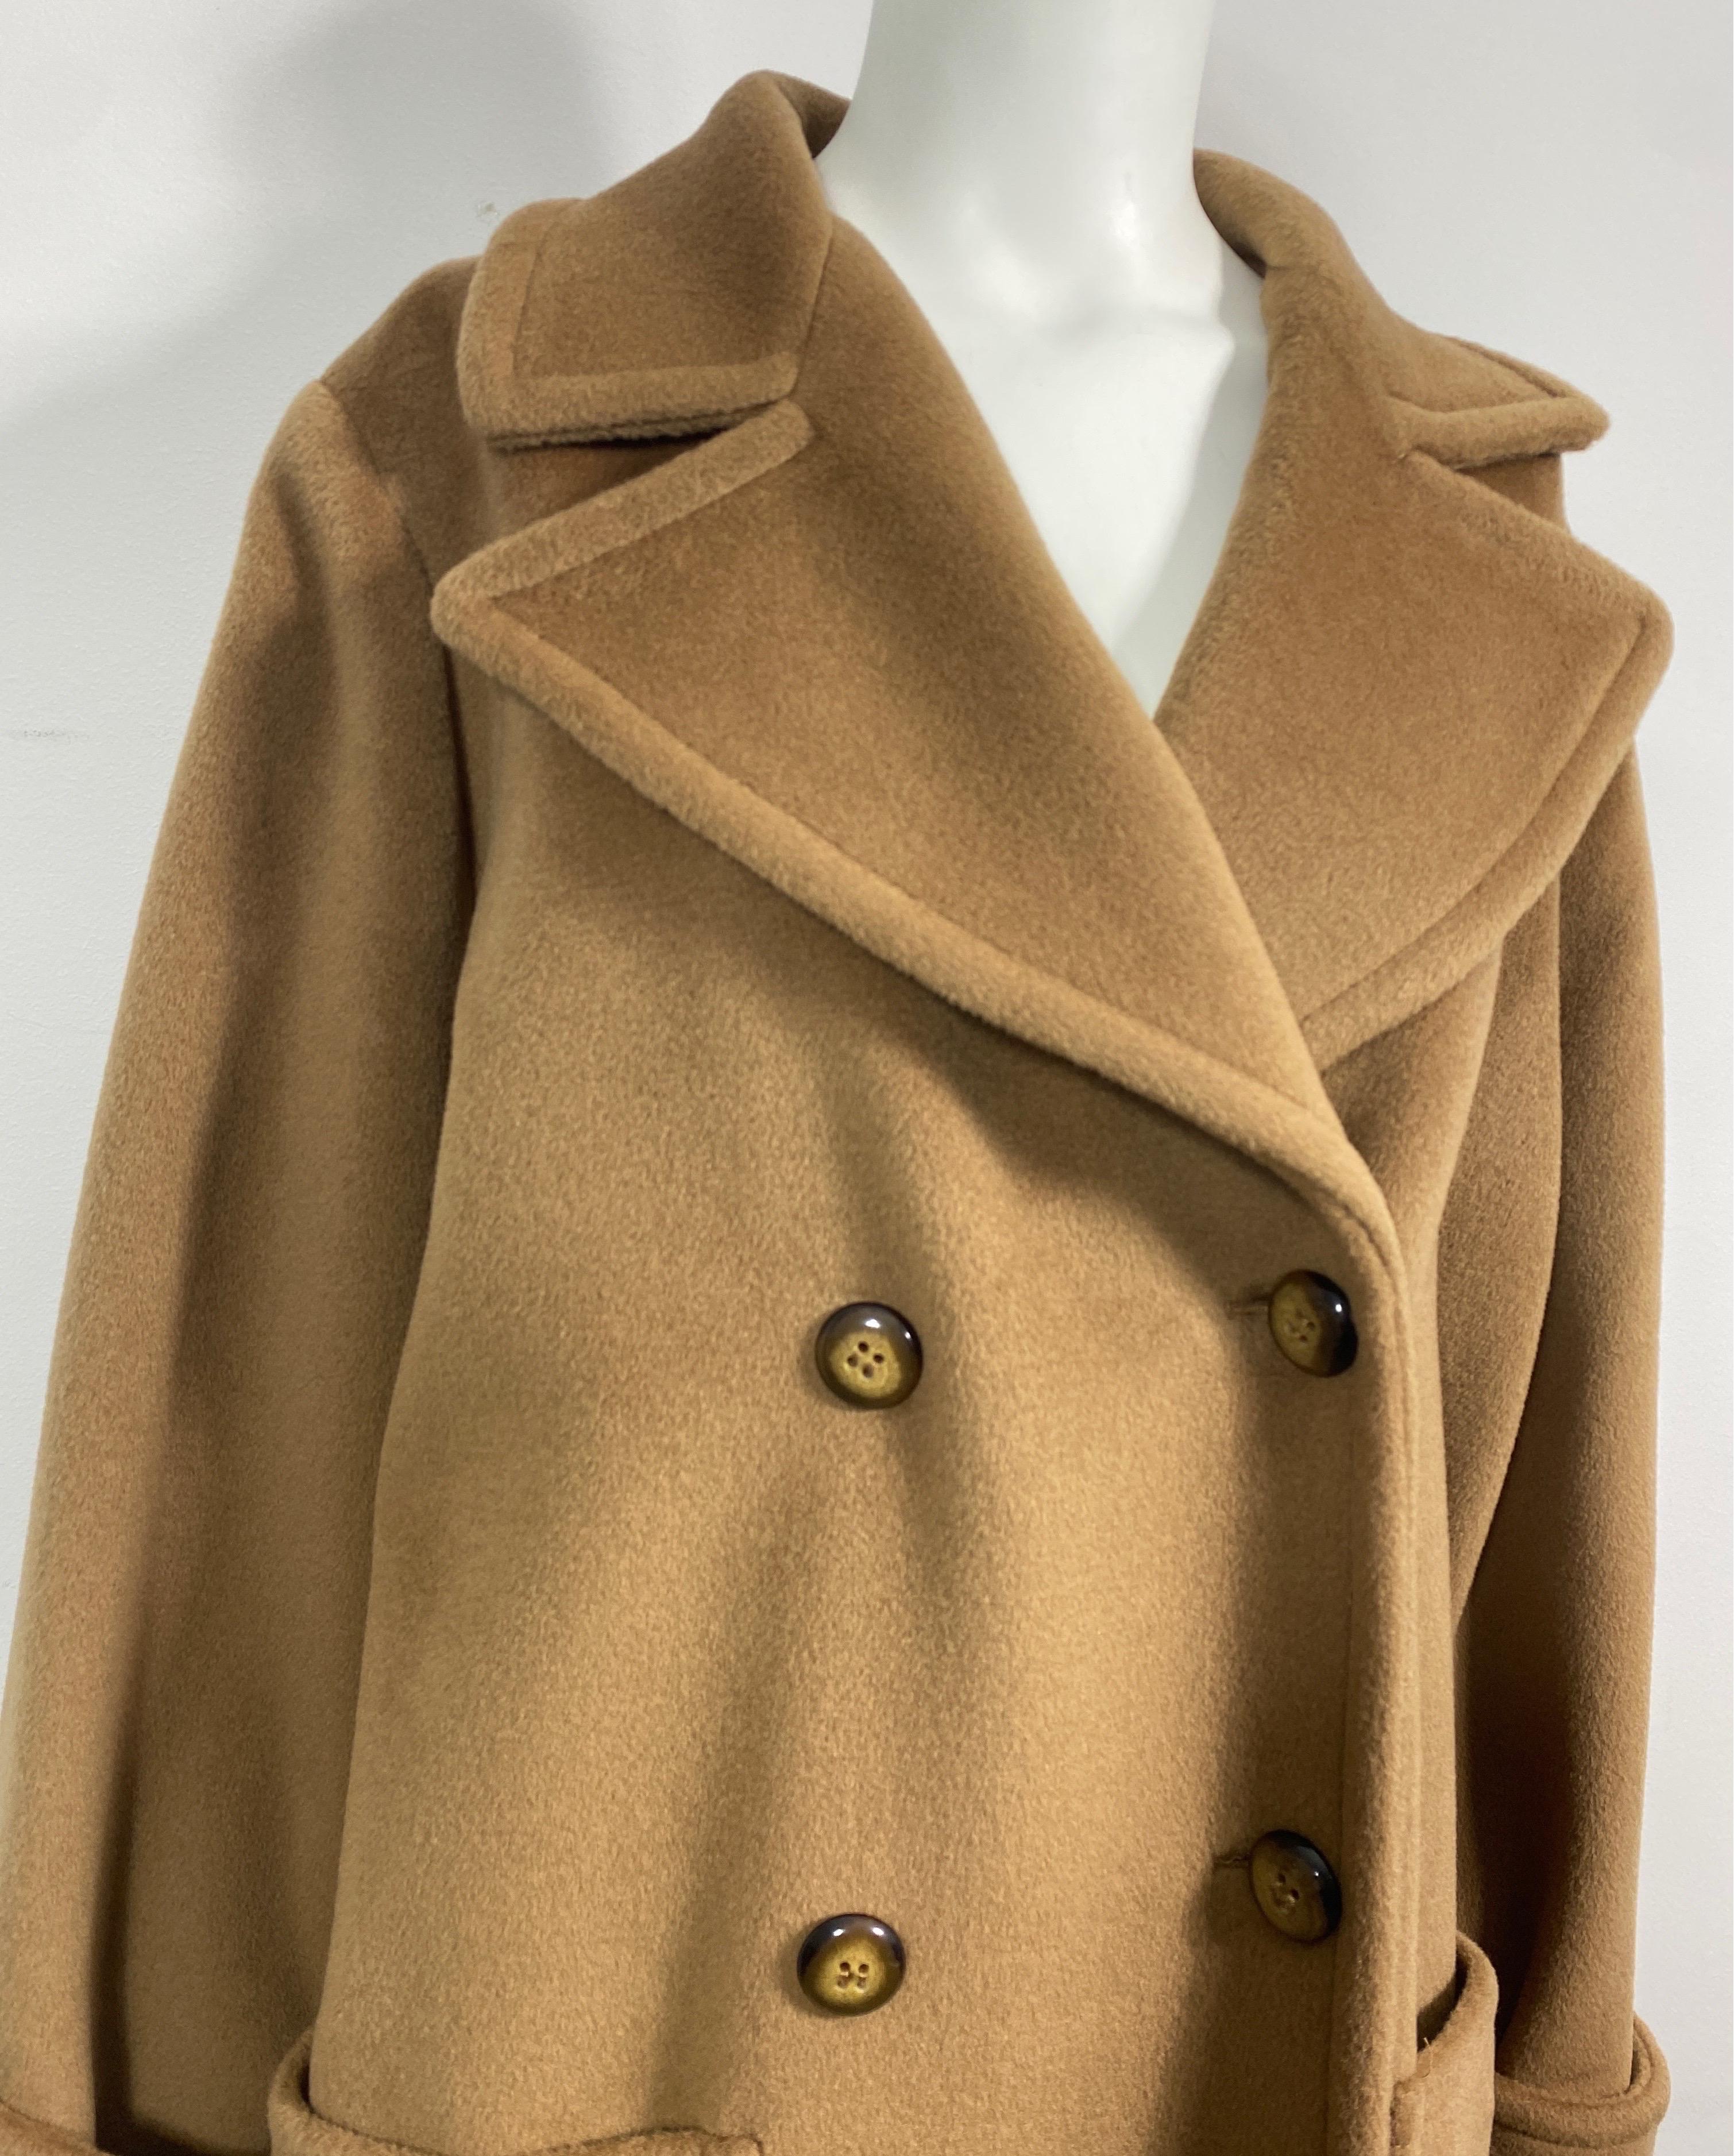 Women's or Men's Valentino Boutique 1990’s Double Breasted Tan Cashmere Oversized Coat - Size 10 For Sale